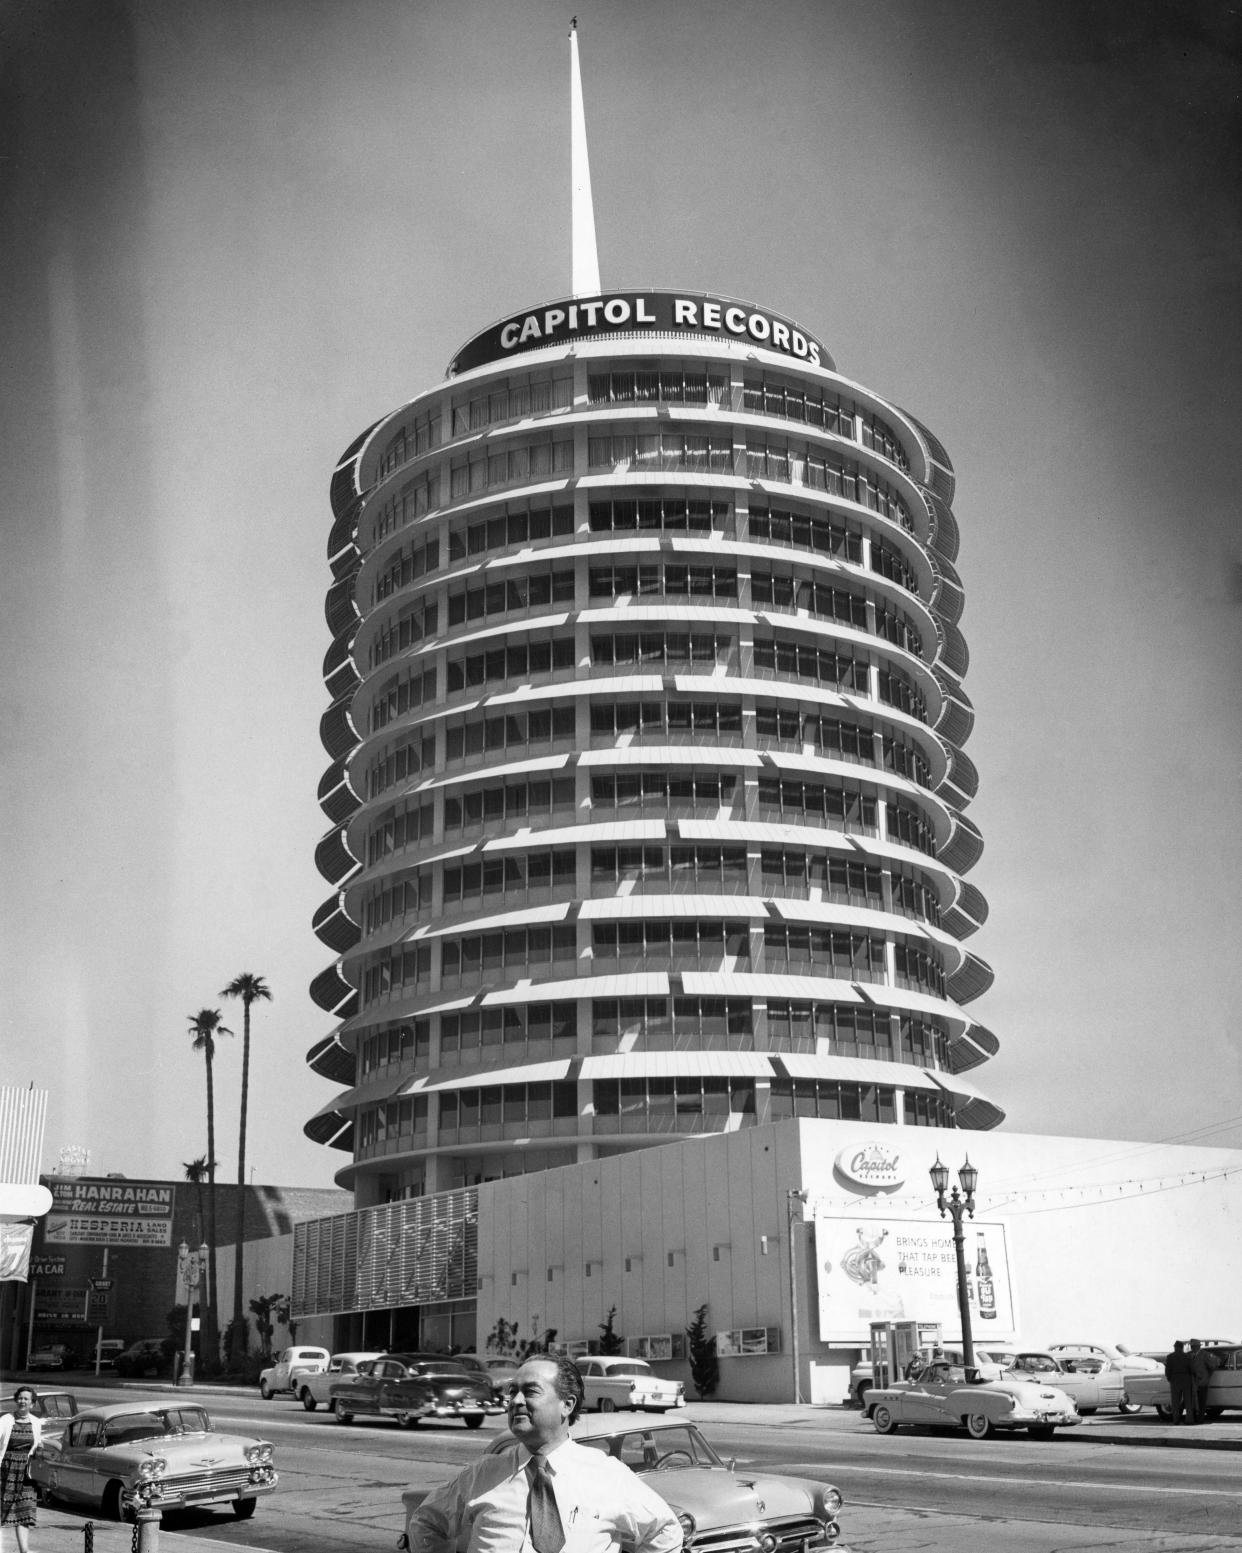 Capitol Records Building in 1957